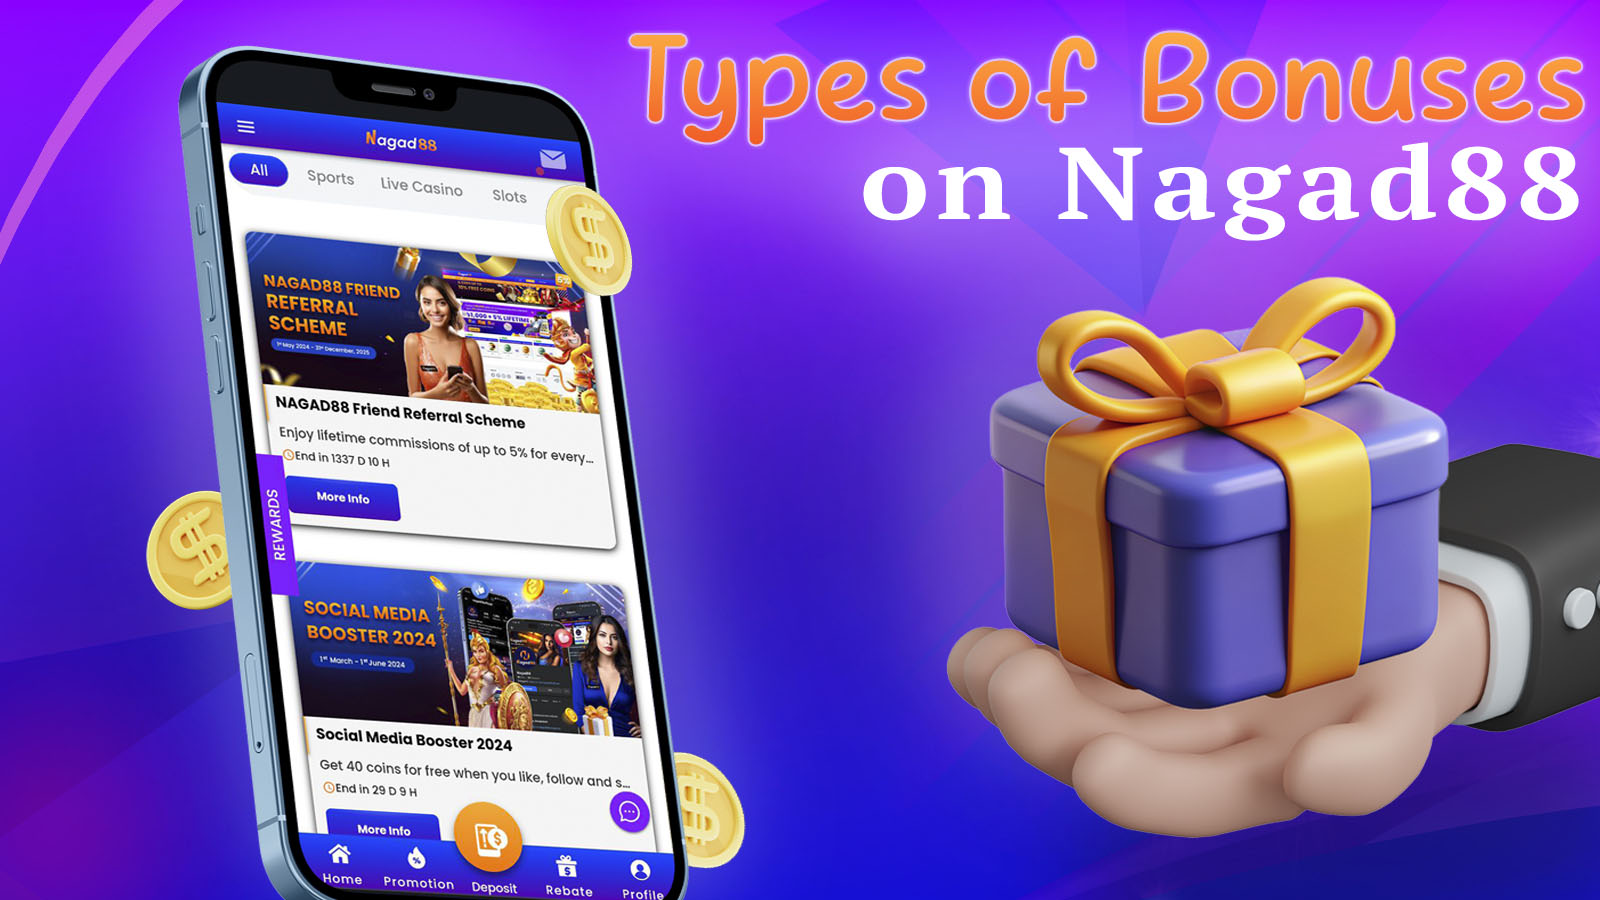 Nagad88 offers various bonuses that are designed to improve user interest in games